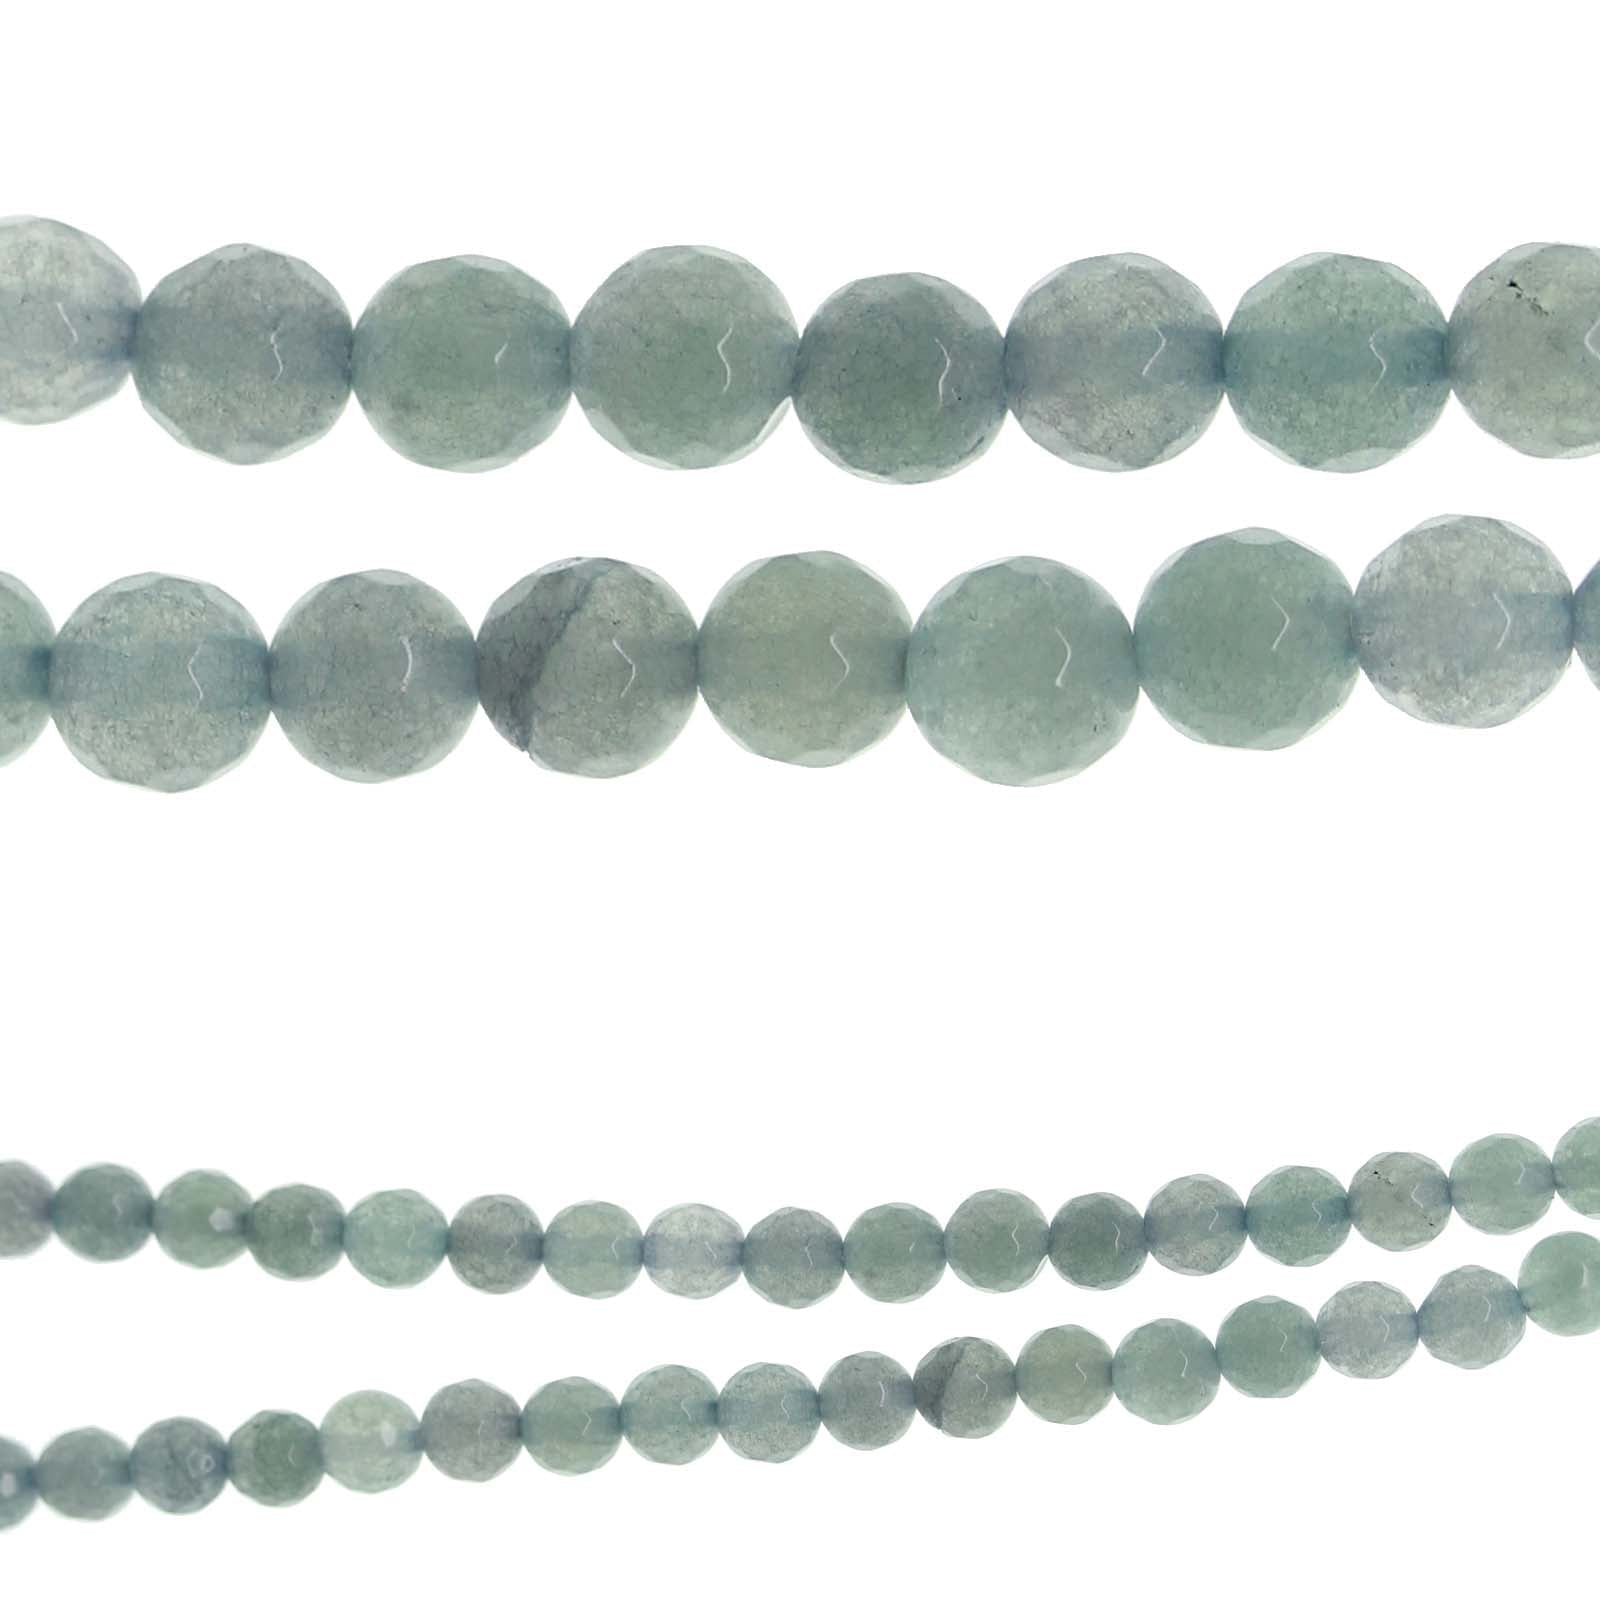 Aqua Dyed Quartzite Faceted 6mm Round BeadsBeads by Halcraft Collection